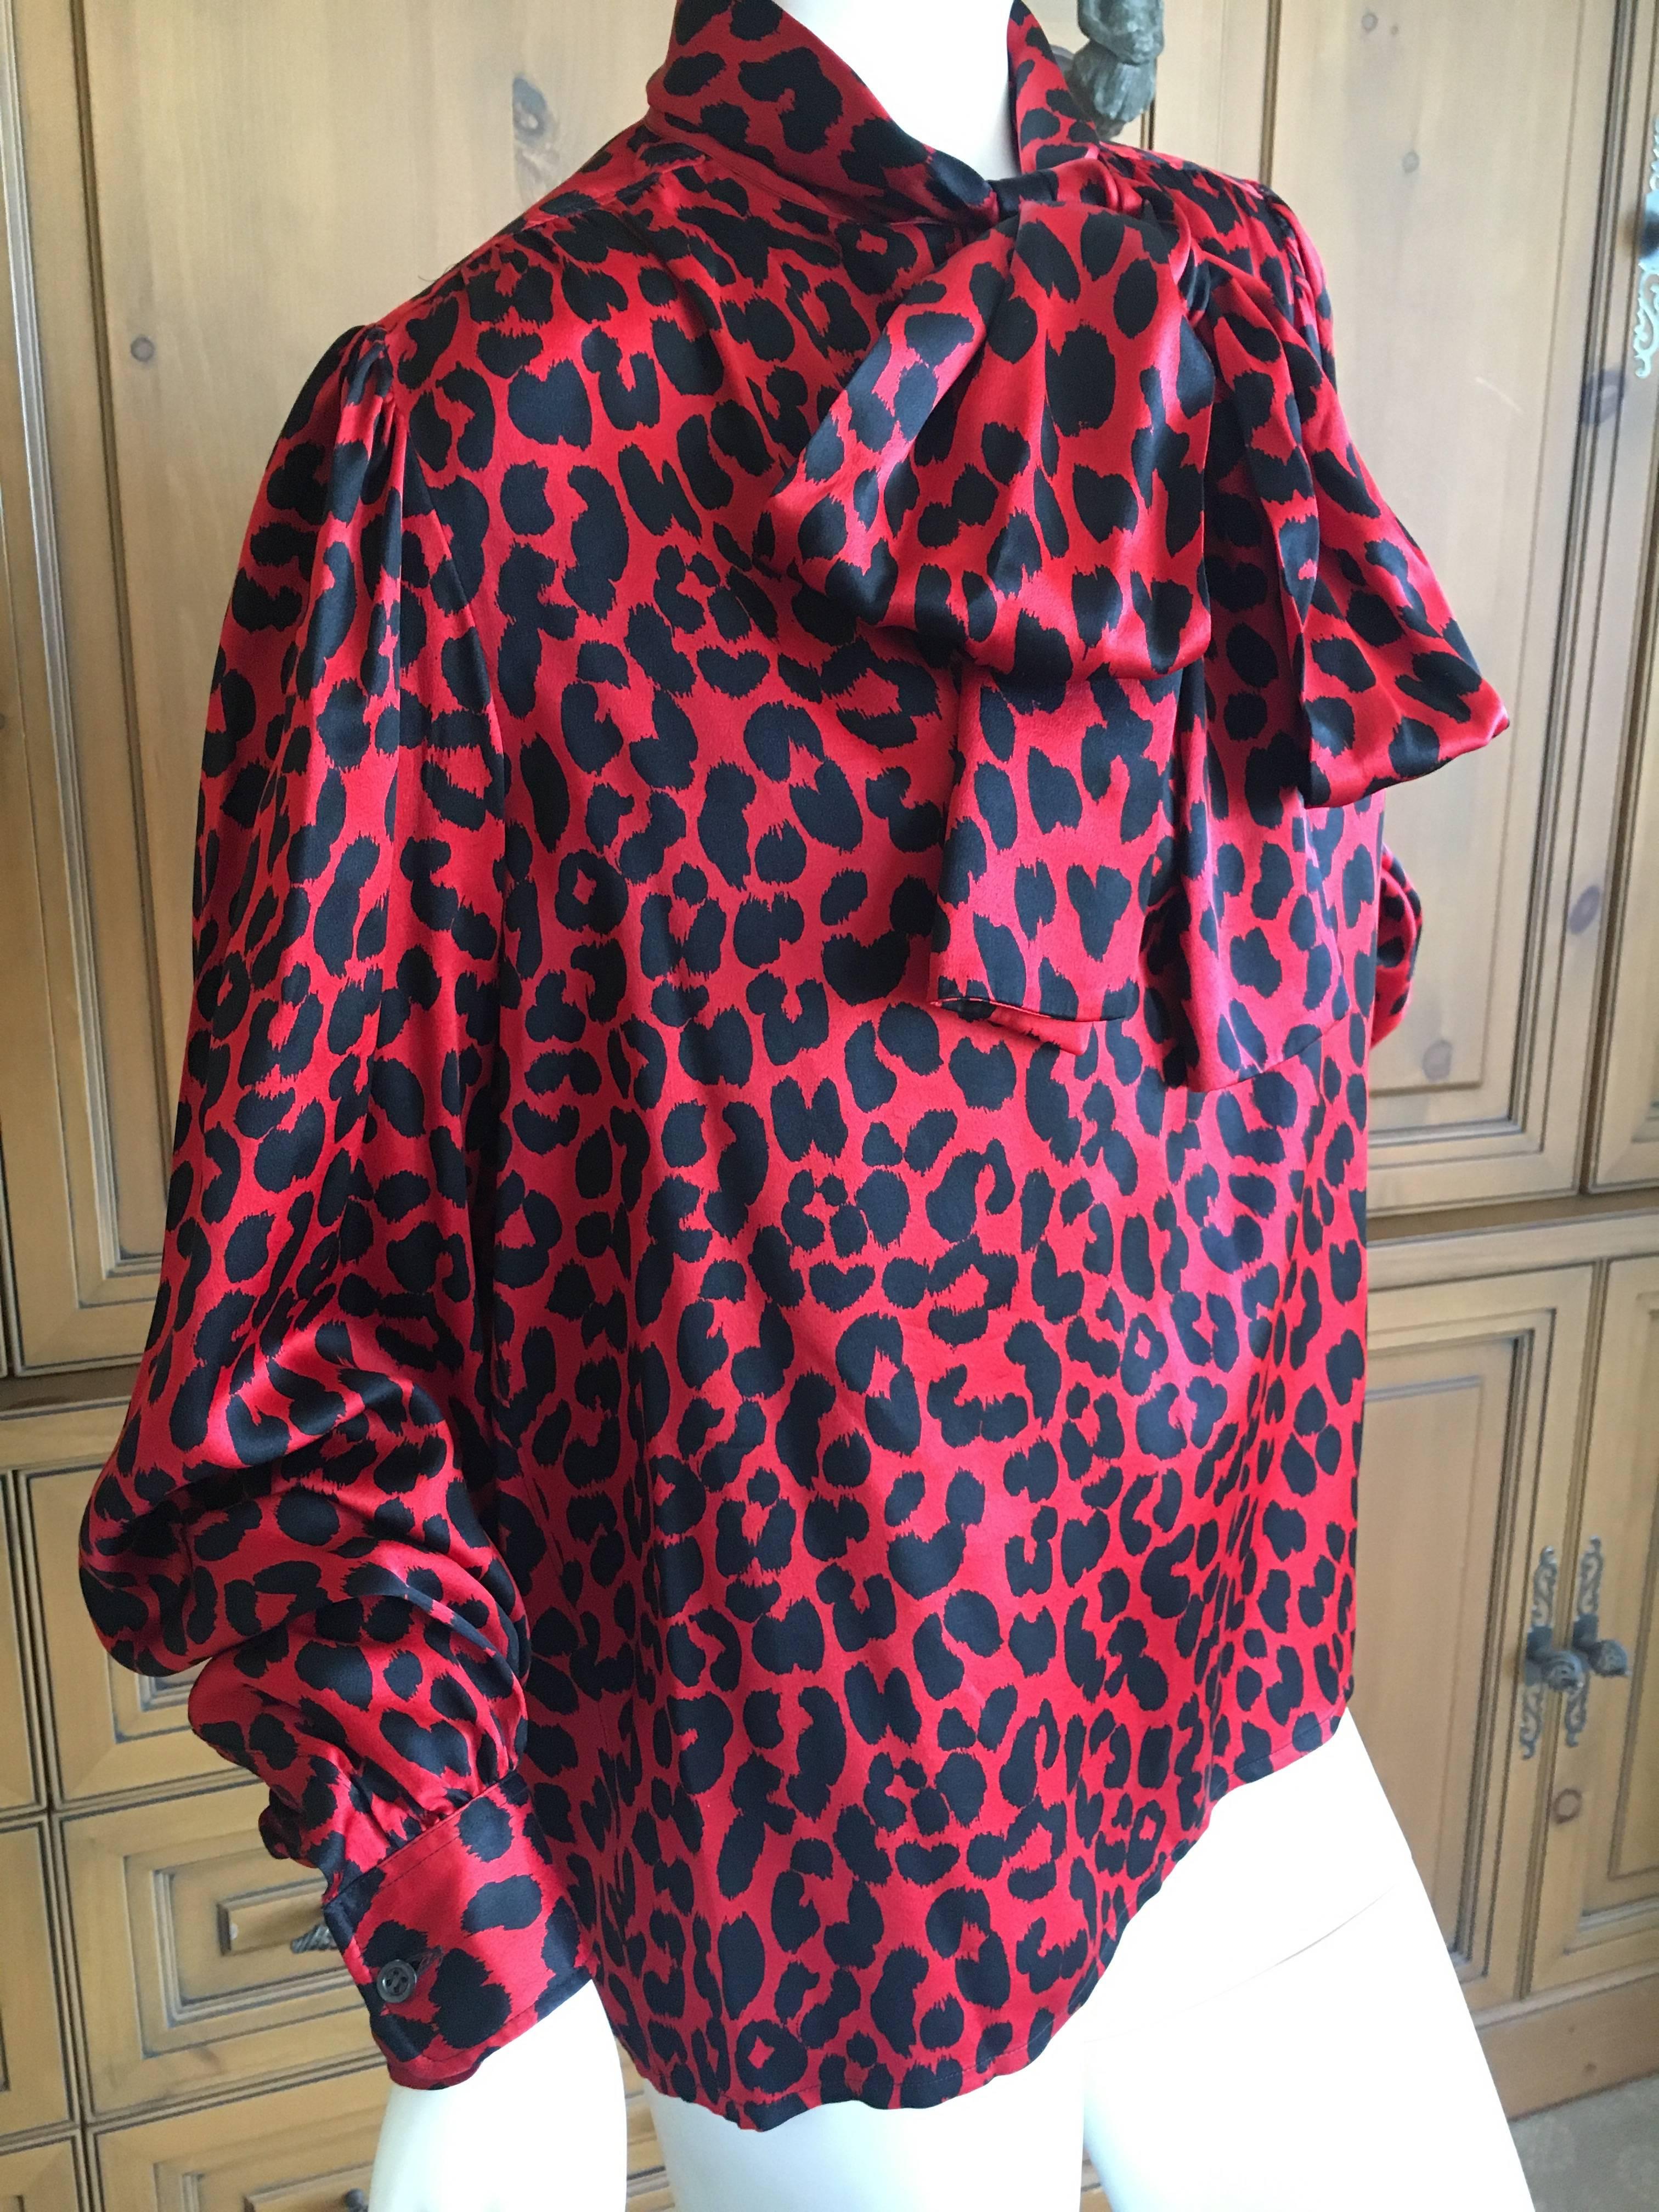 Yves Saint Laurent 70's Rive Gauche Red Leopard Print Pin Tuck Silk Keyhole Blouse with Pussy Bow and Bishop Sleeves.
Size 42

Bust 45"
 Waist 45" 
Length 28" 
Excellent condition